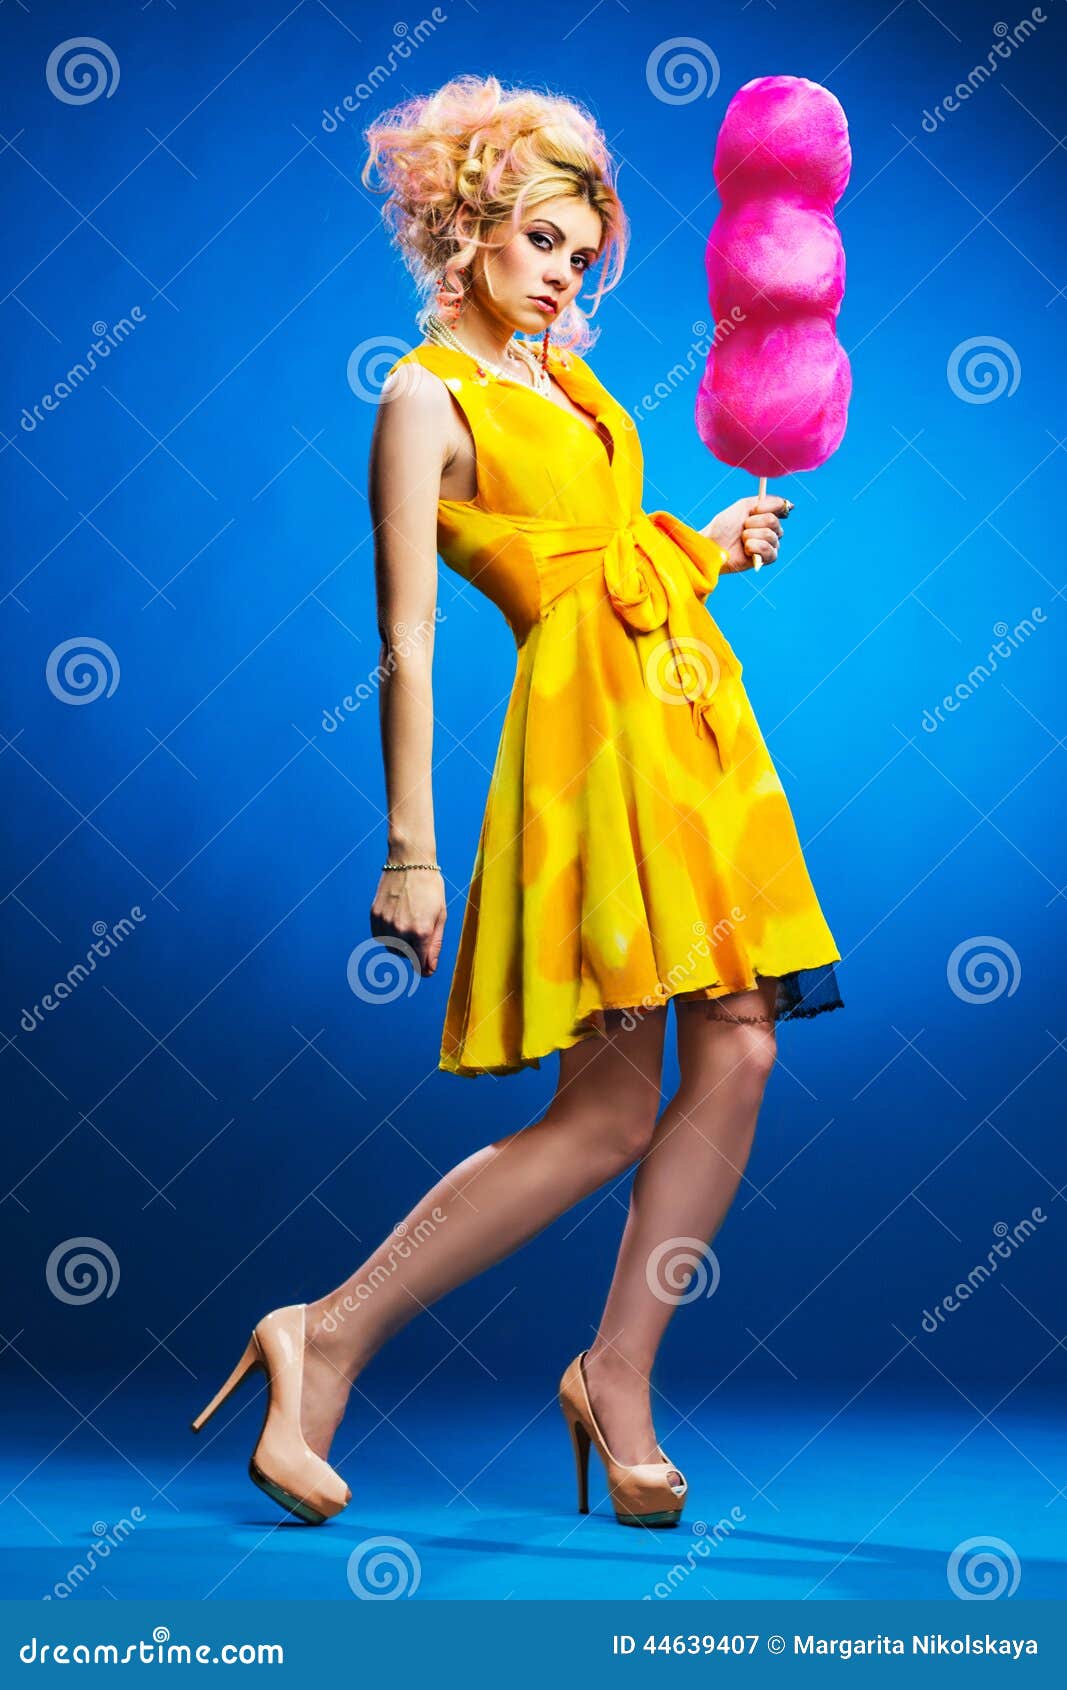 Portrait of Young Woman with Candyfloss Stock Image - Image of high ...